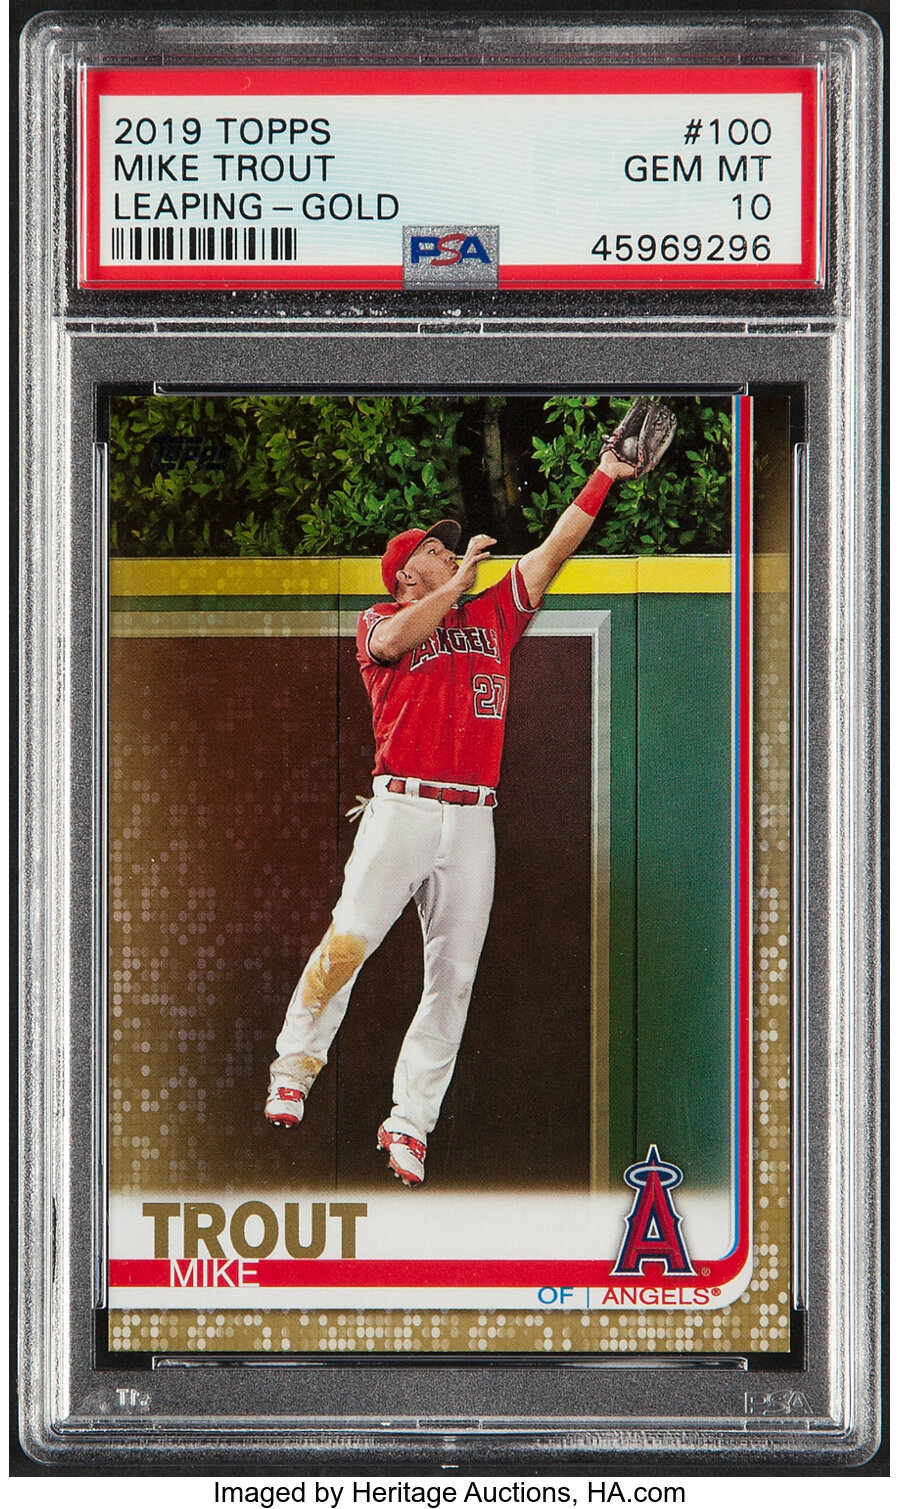 2019 Topps Mike Trout (Leaping - Gold) #100 PSA Gem Mint 10 - Serial #'d 1892/2019